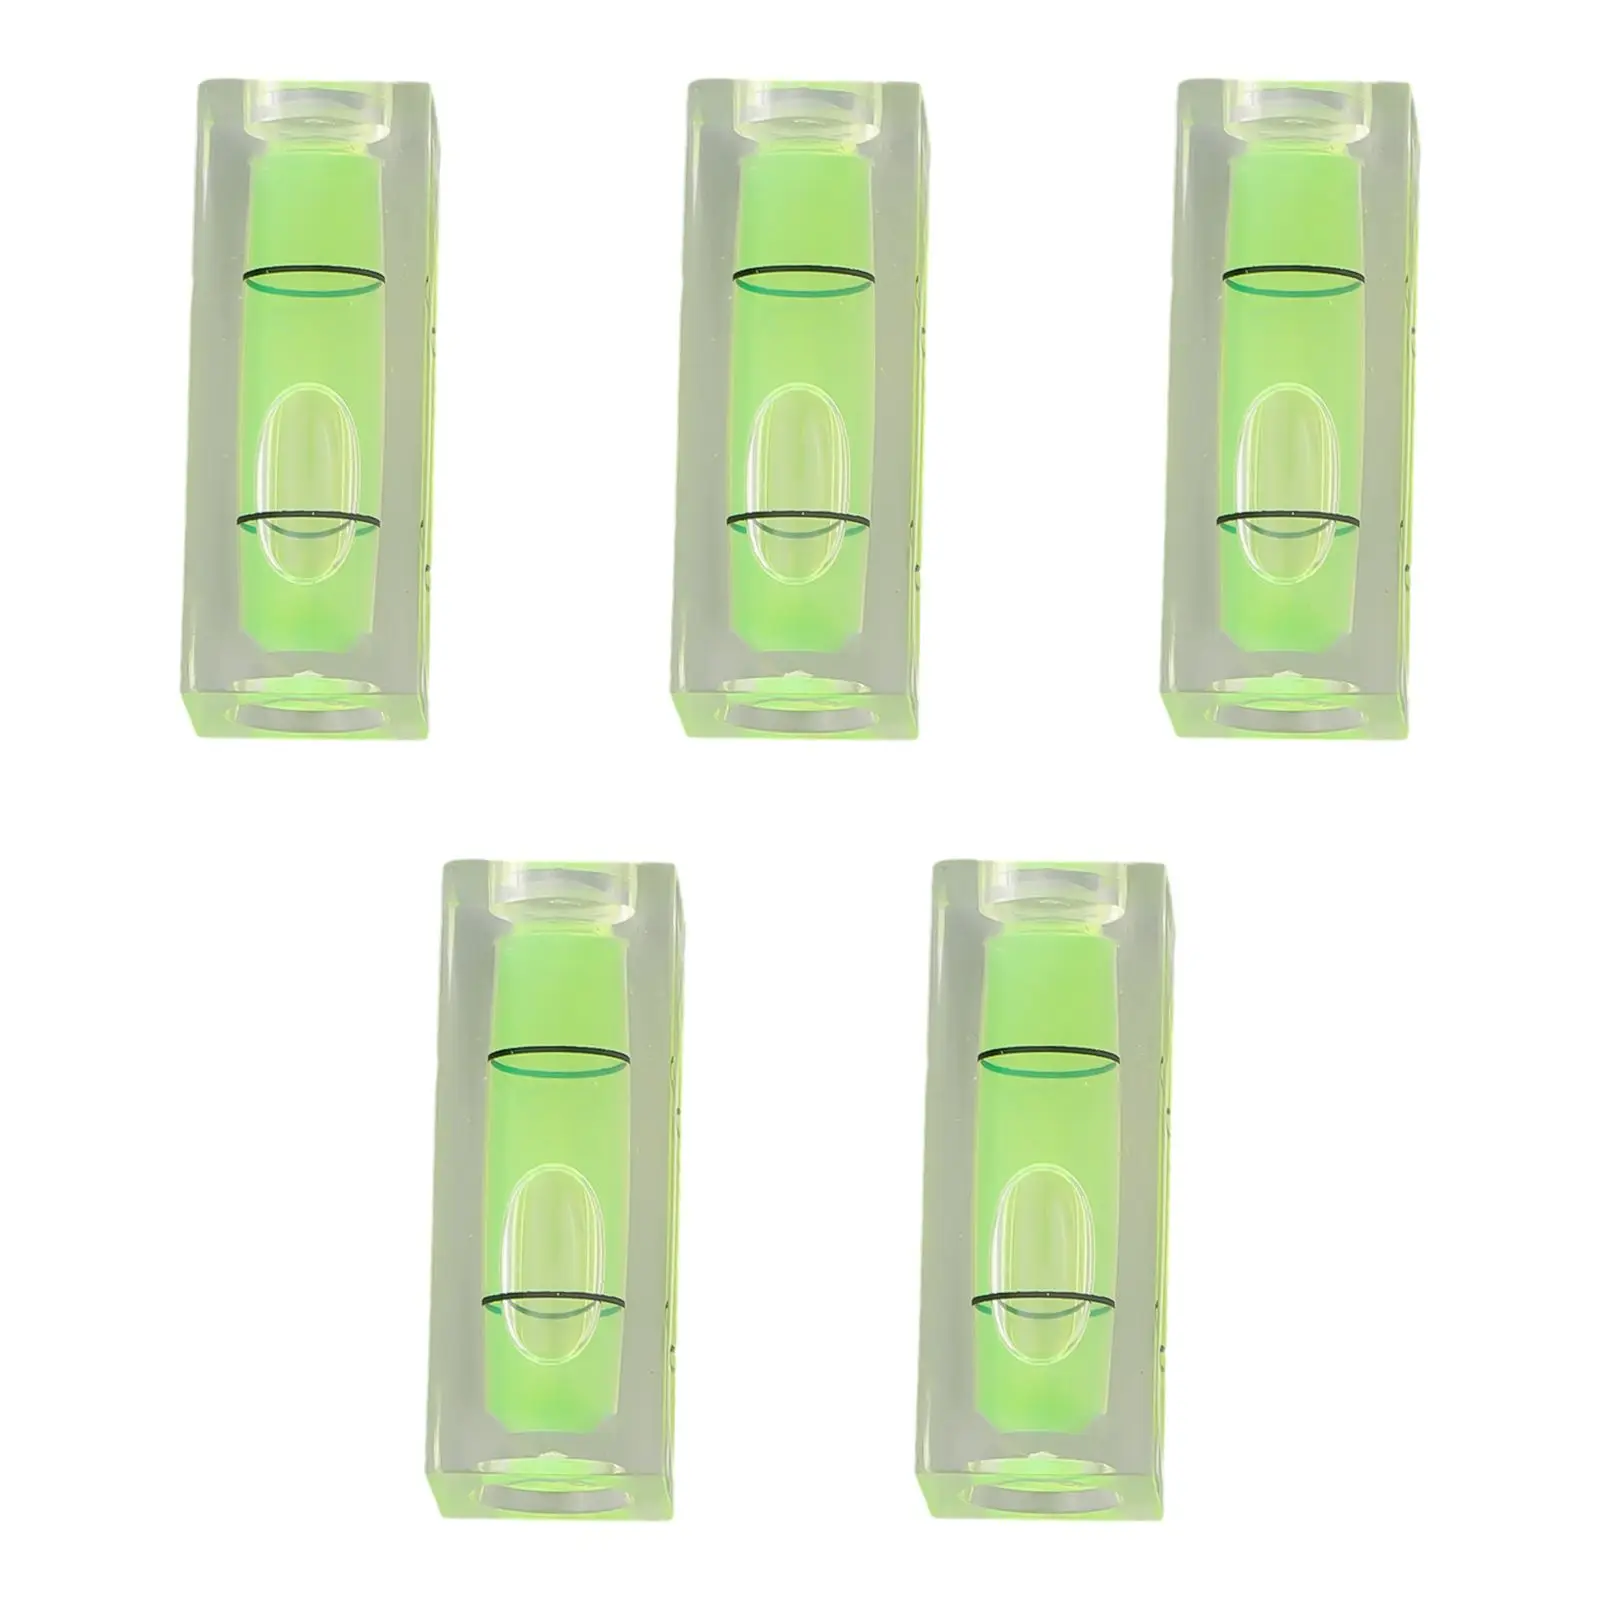 ABS Plastic Spirit Level Spirit Level Acrylic 40*15*15mm Bubble For Green 40mm Leveling Small Spirit Level Square cupbtna mini pocket spirit level tool spirited away furniture levelers magnetic abs shell 3 bubble ruler leveling instrument